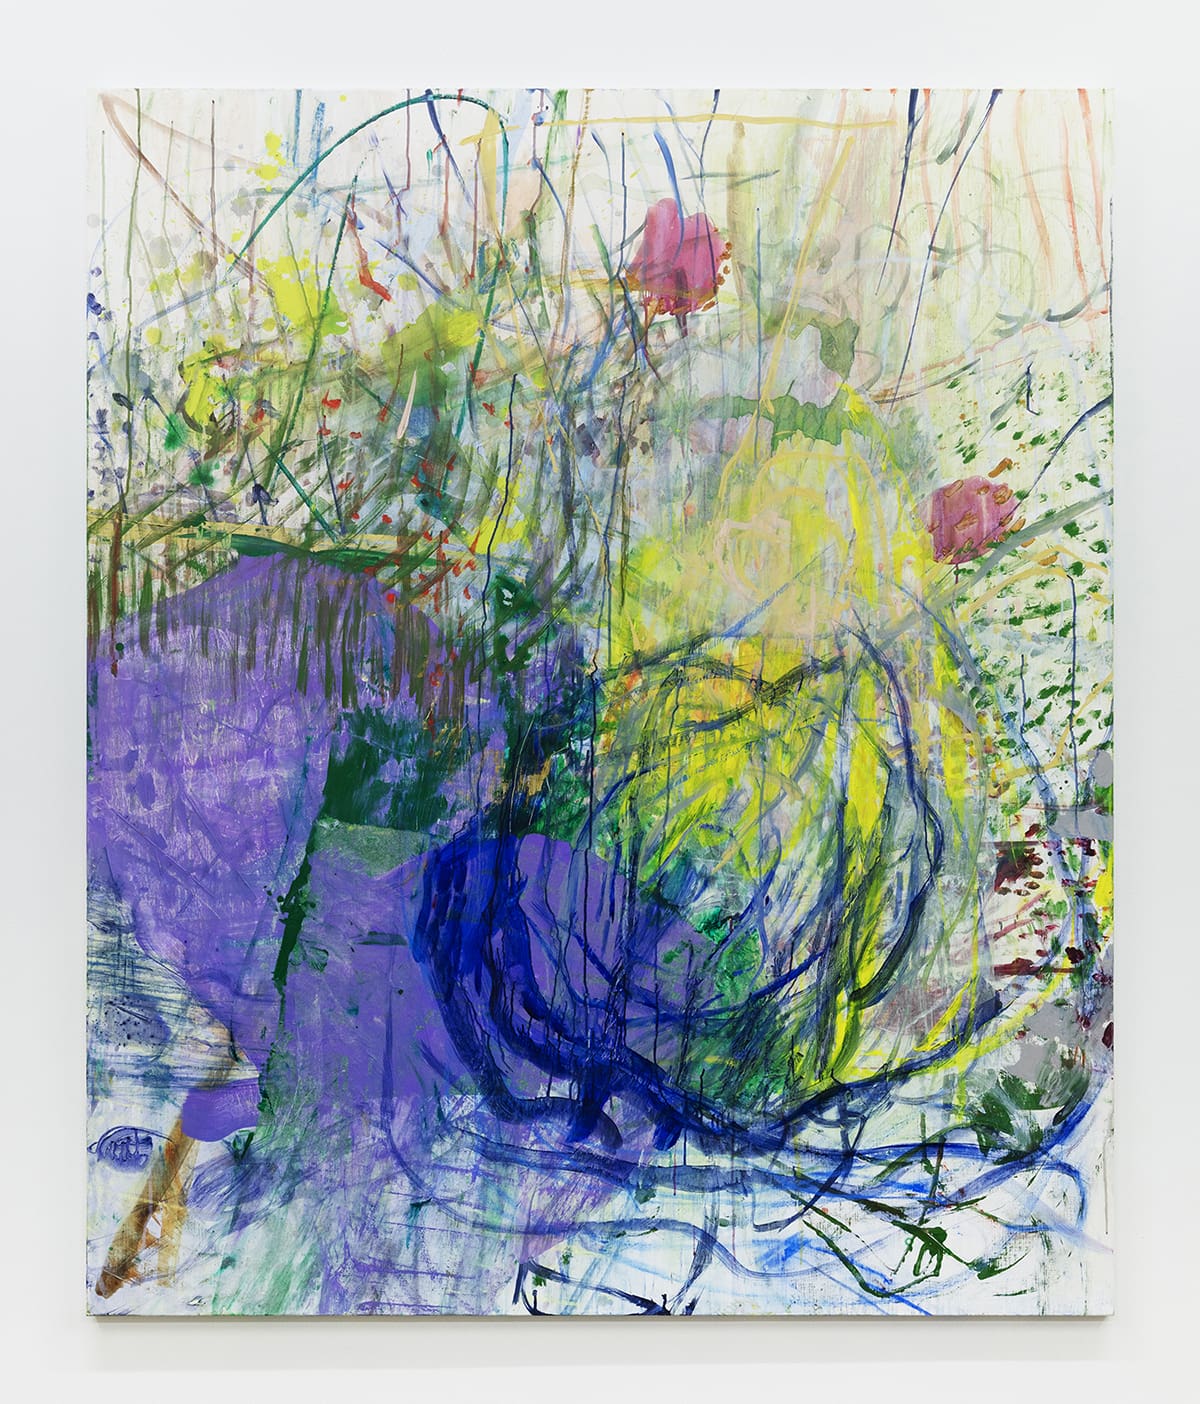 Ina Gerken Growing, 2023 Acrylic, pastel, oil pastel, tracing paper on linen Image Dimensions: 71 x 59 inches (180.3 x 149.9 cm)